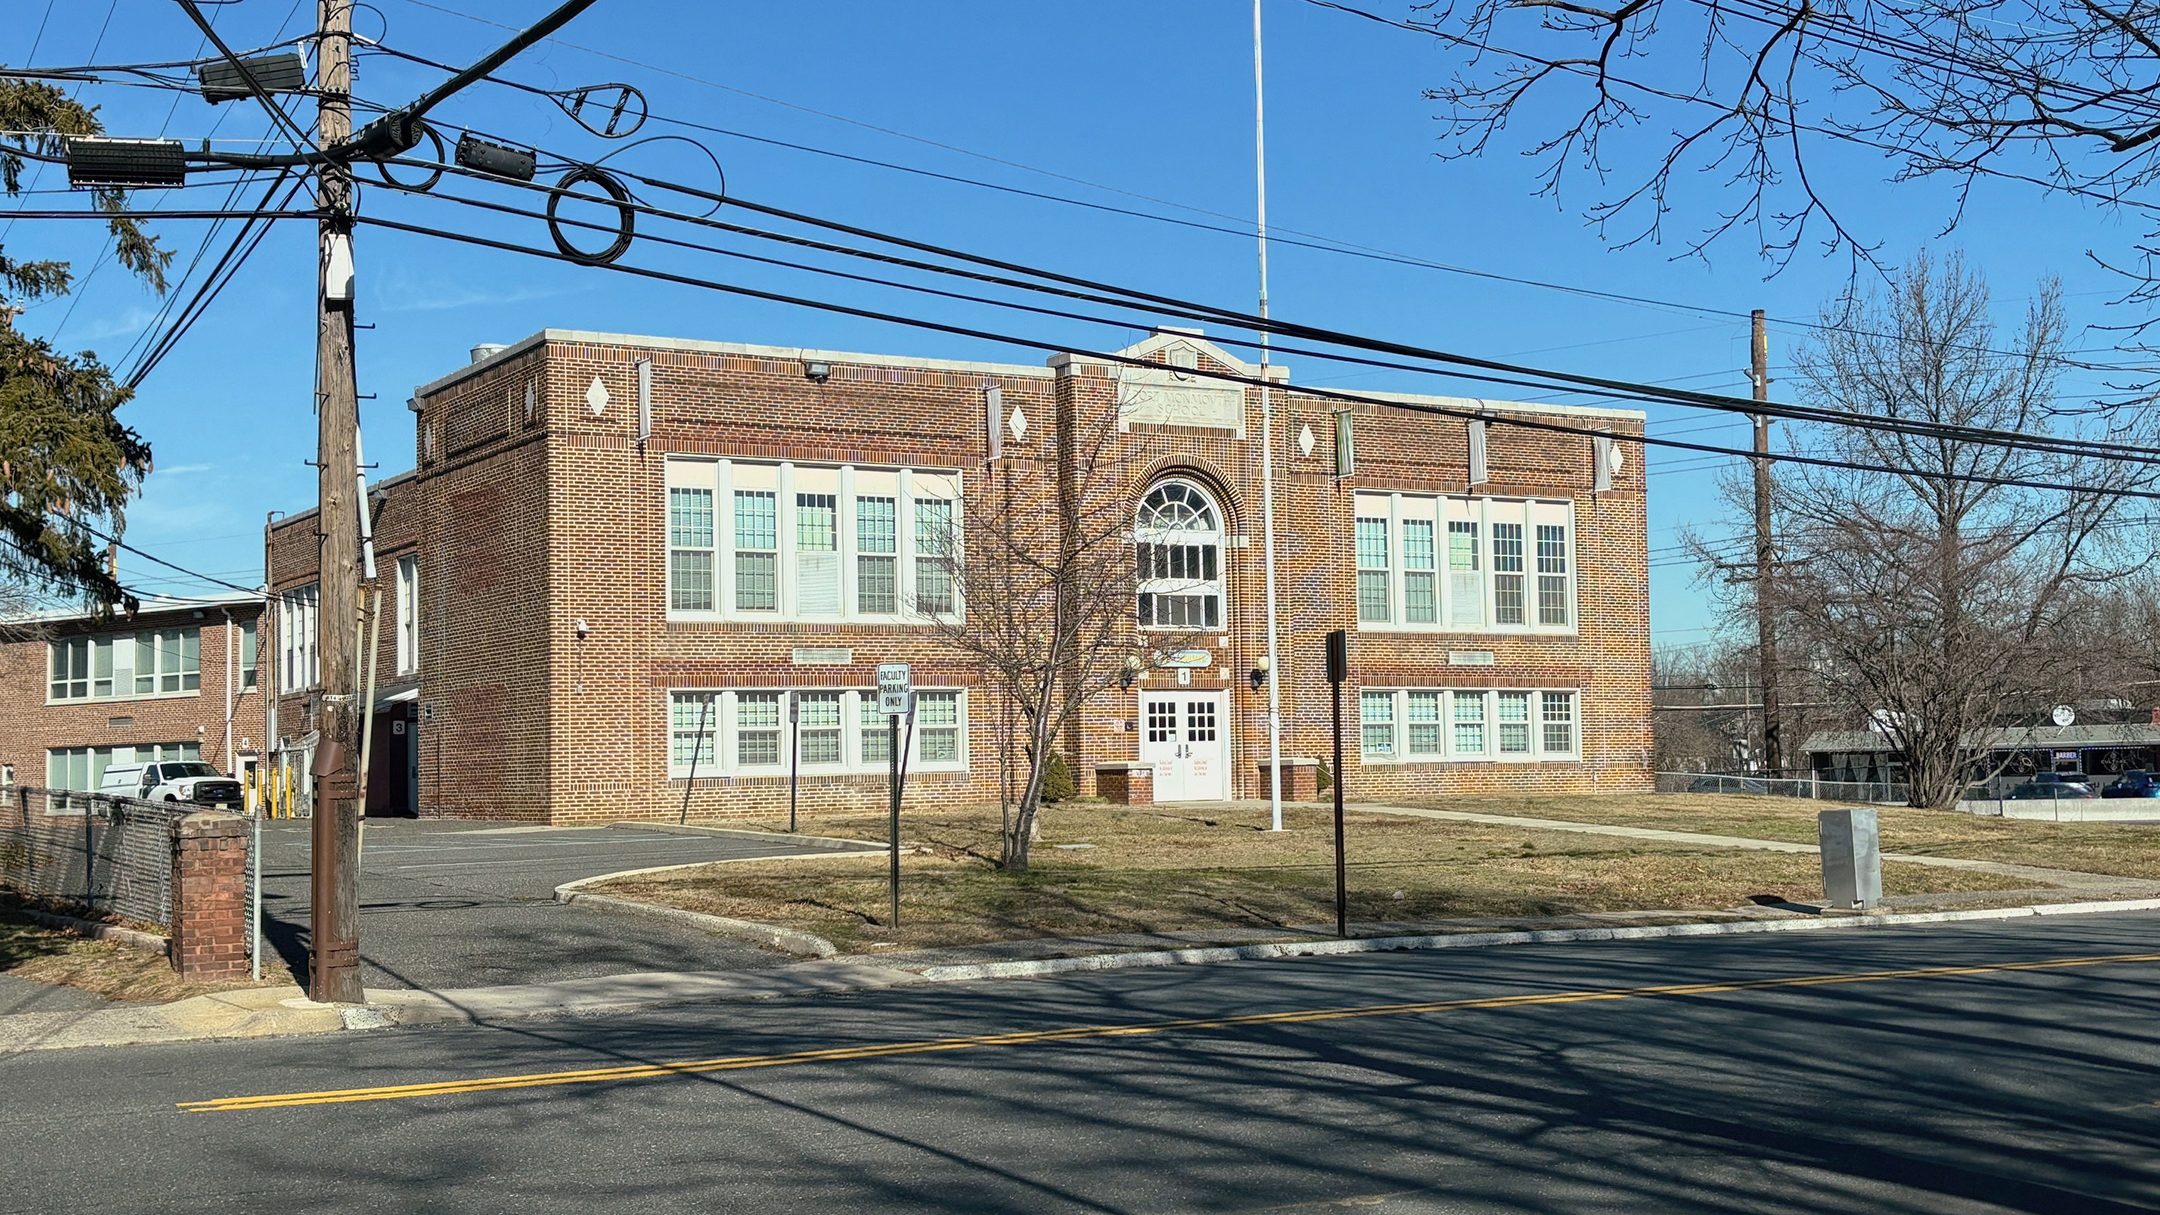 Monmouth County is in the process of acquiring the former Port Monmouth Elementary School for potential use as an indoor aquatic center. Stephen Appezzato